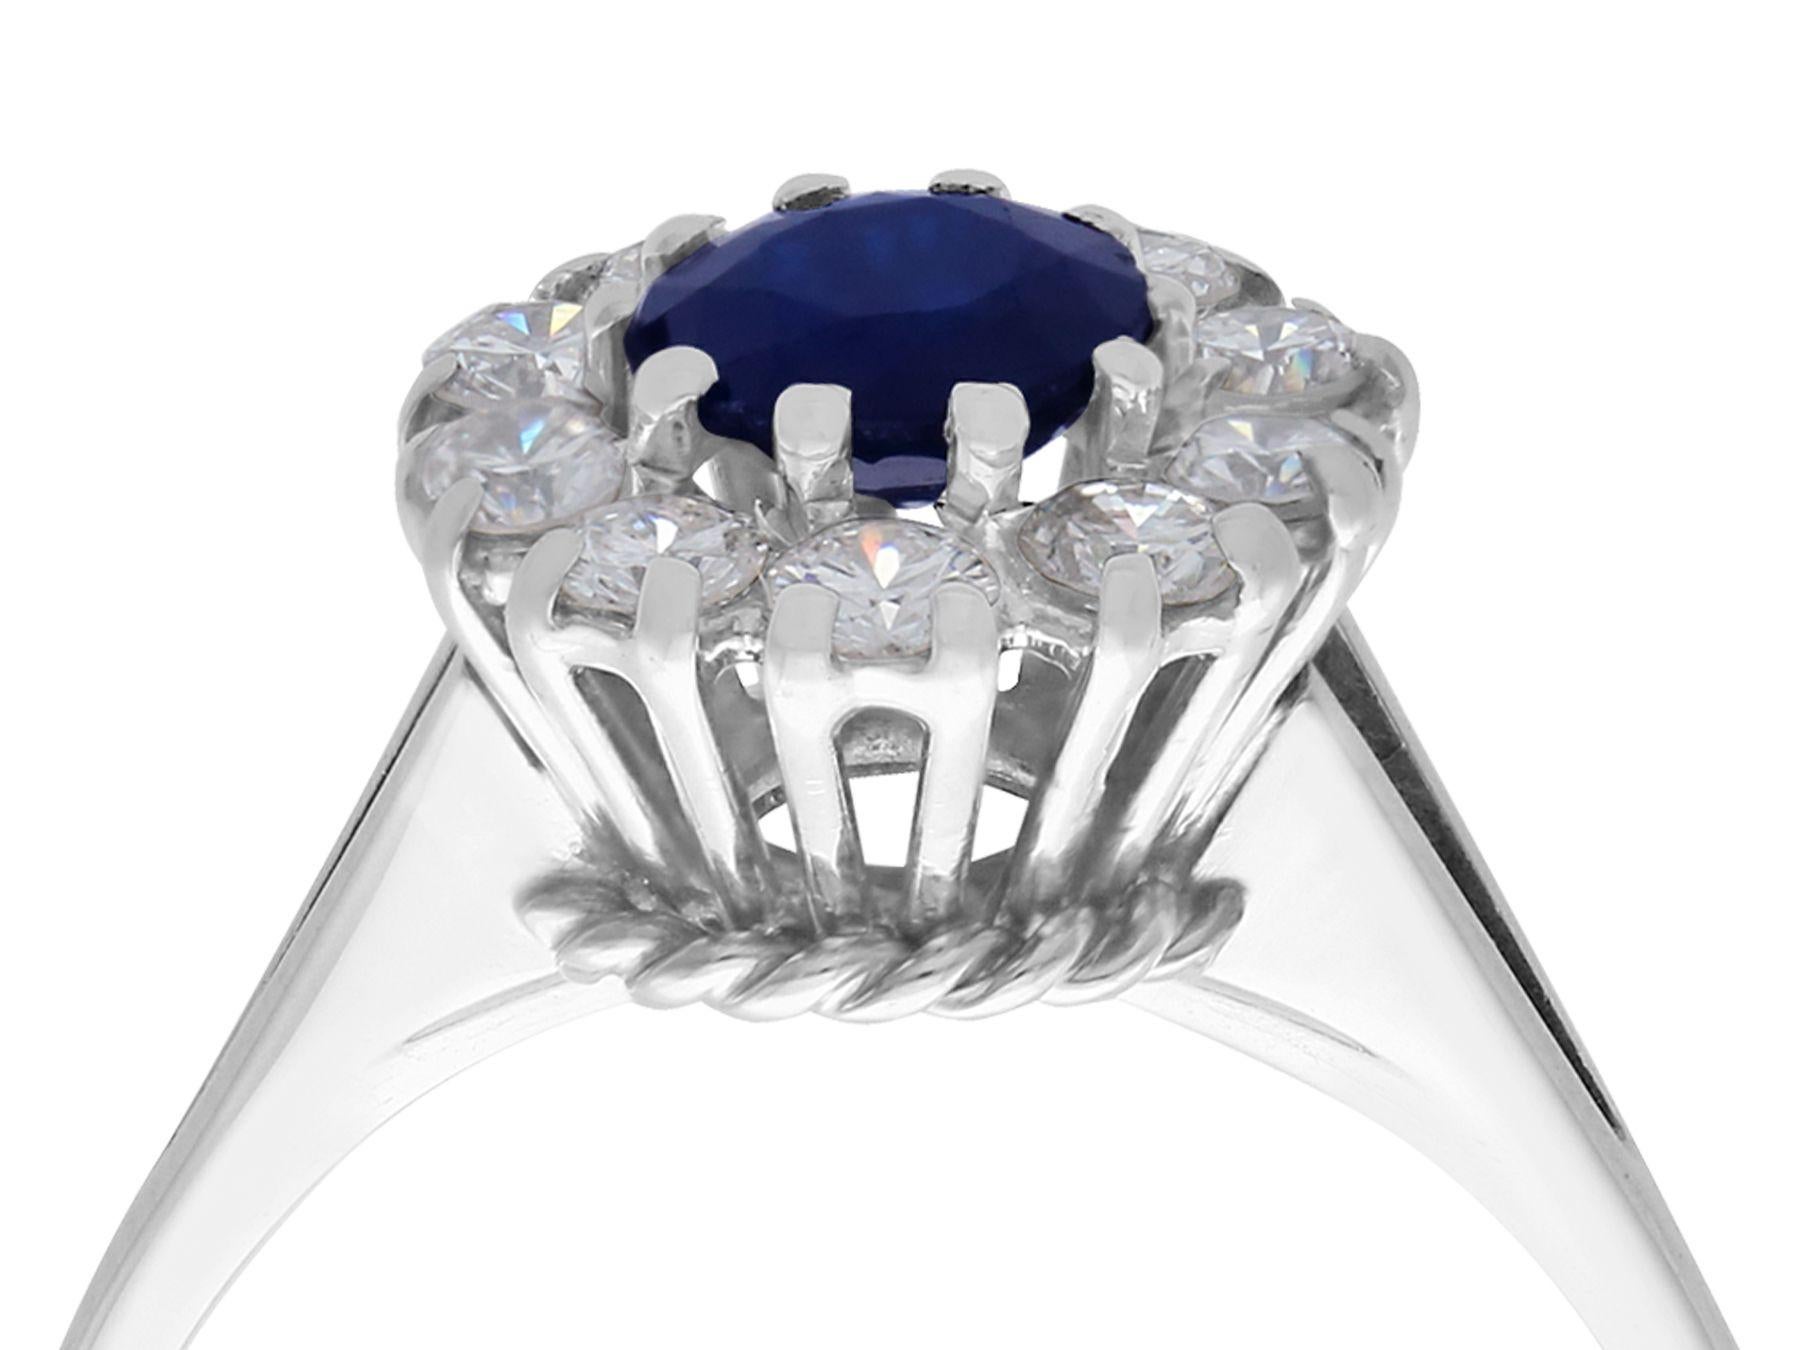 A fine and impressive vintage 0.78 carat natural blue sapphire and 0.74 carat diamond, 18 karat white gold dress ring; part of our vintage jewelry and estate jewelry collection

This blue sapphire and diamond ring has been crafted in 18k white